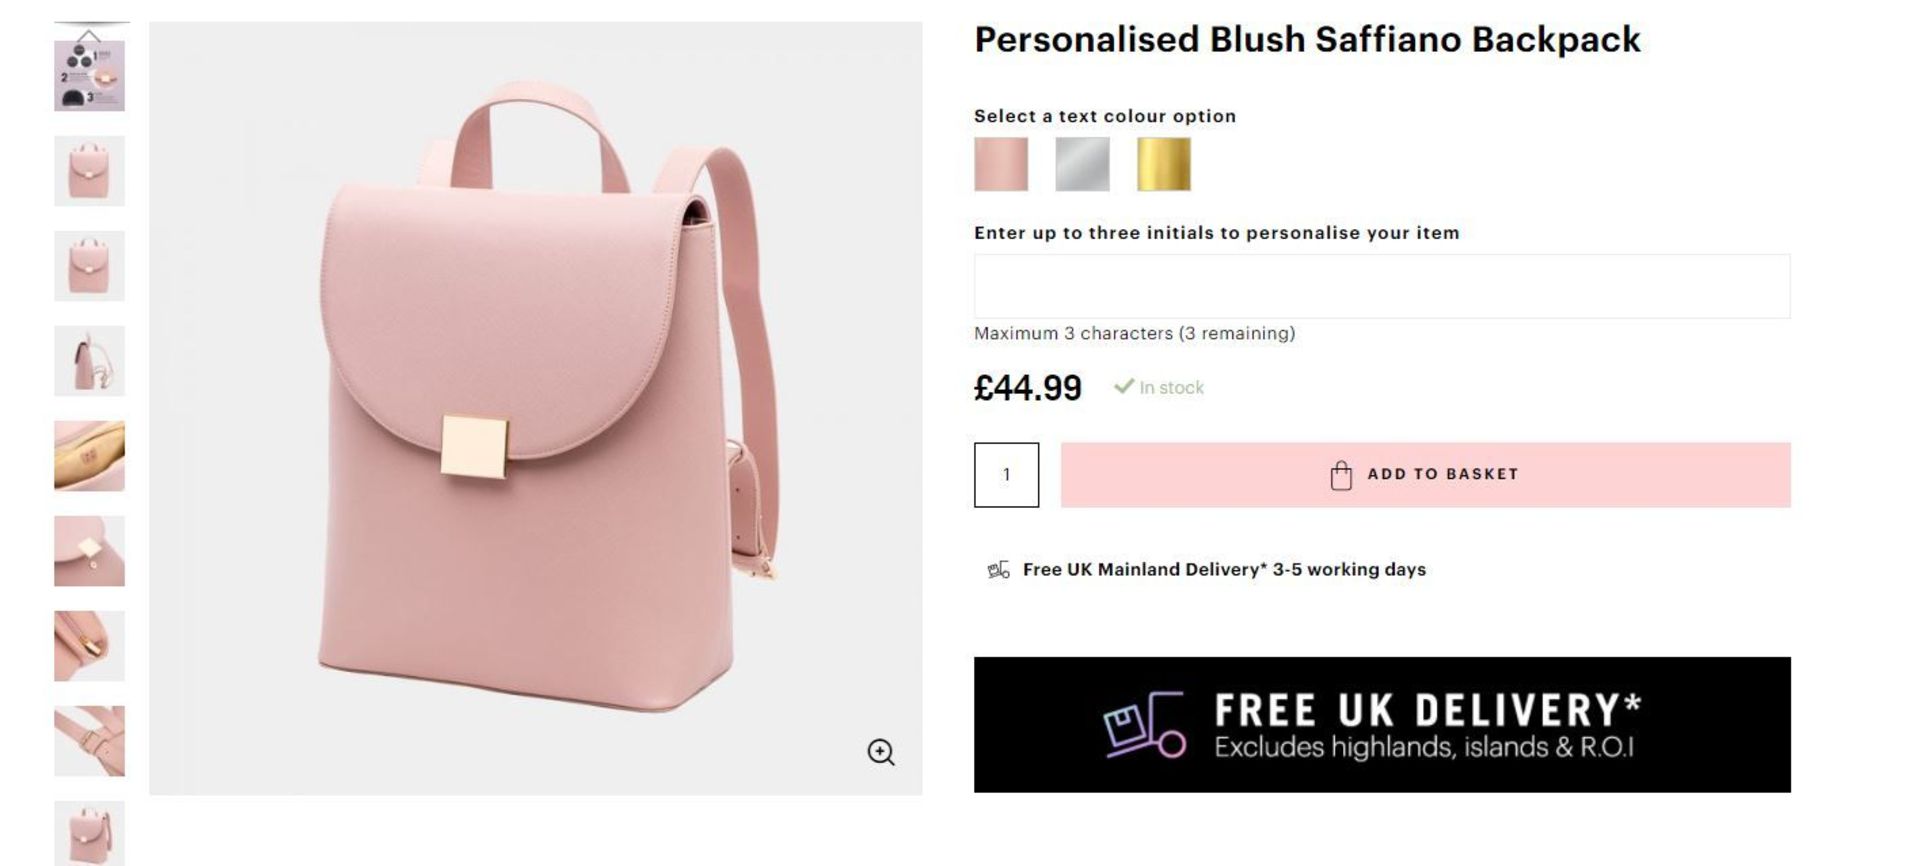 2 x NEW PACKAGED Beauti Saffiano Backpack - Blush. RRP £49.99 each. Note: Item is not personalised.